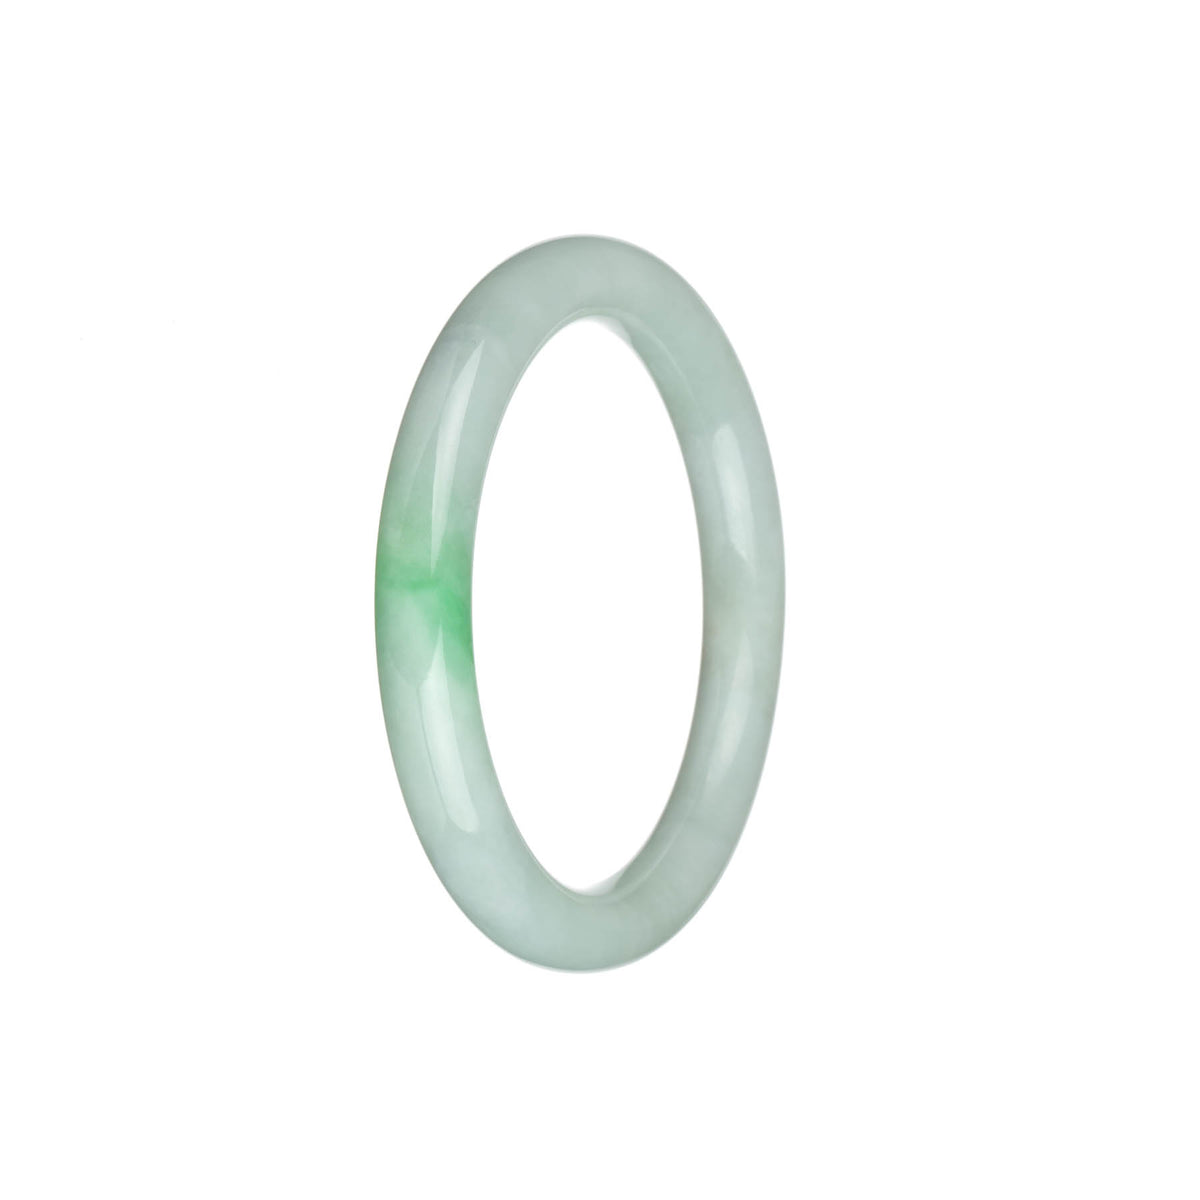 Authentic Grade A White with Apple Green Jade Bangle - 54mm Petite Round